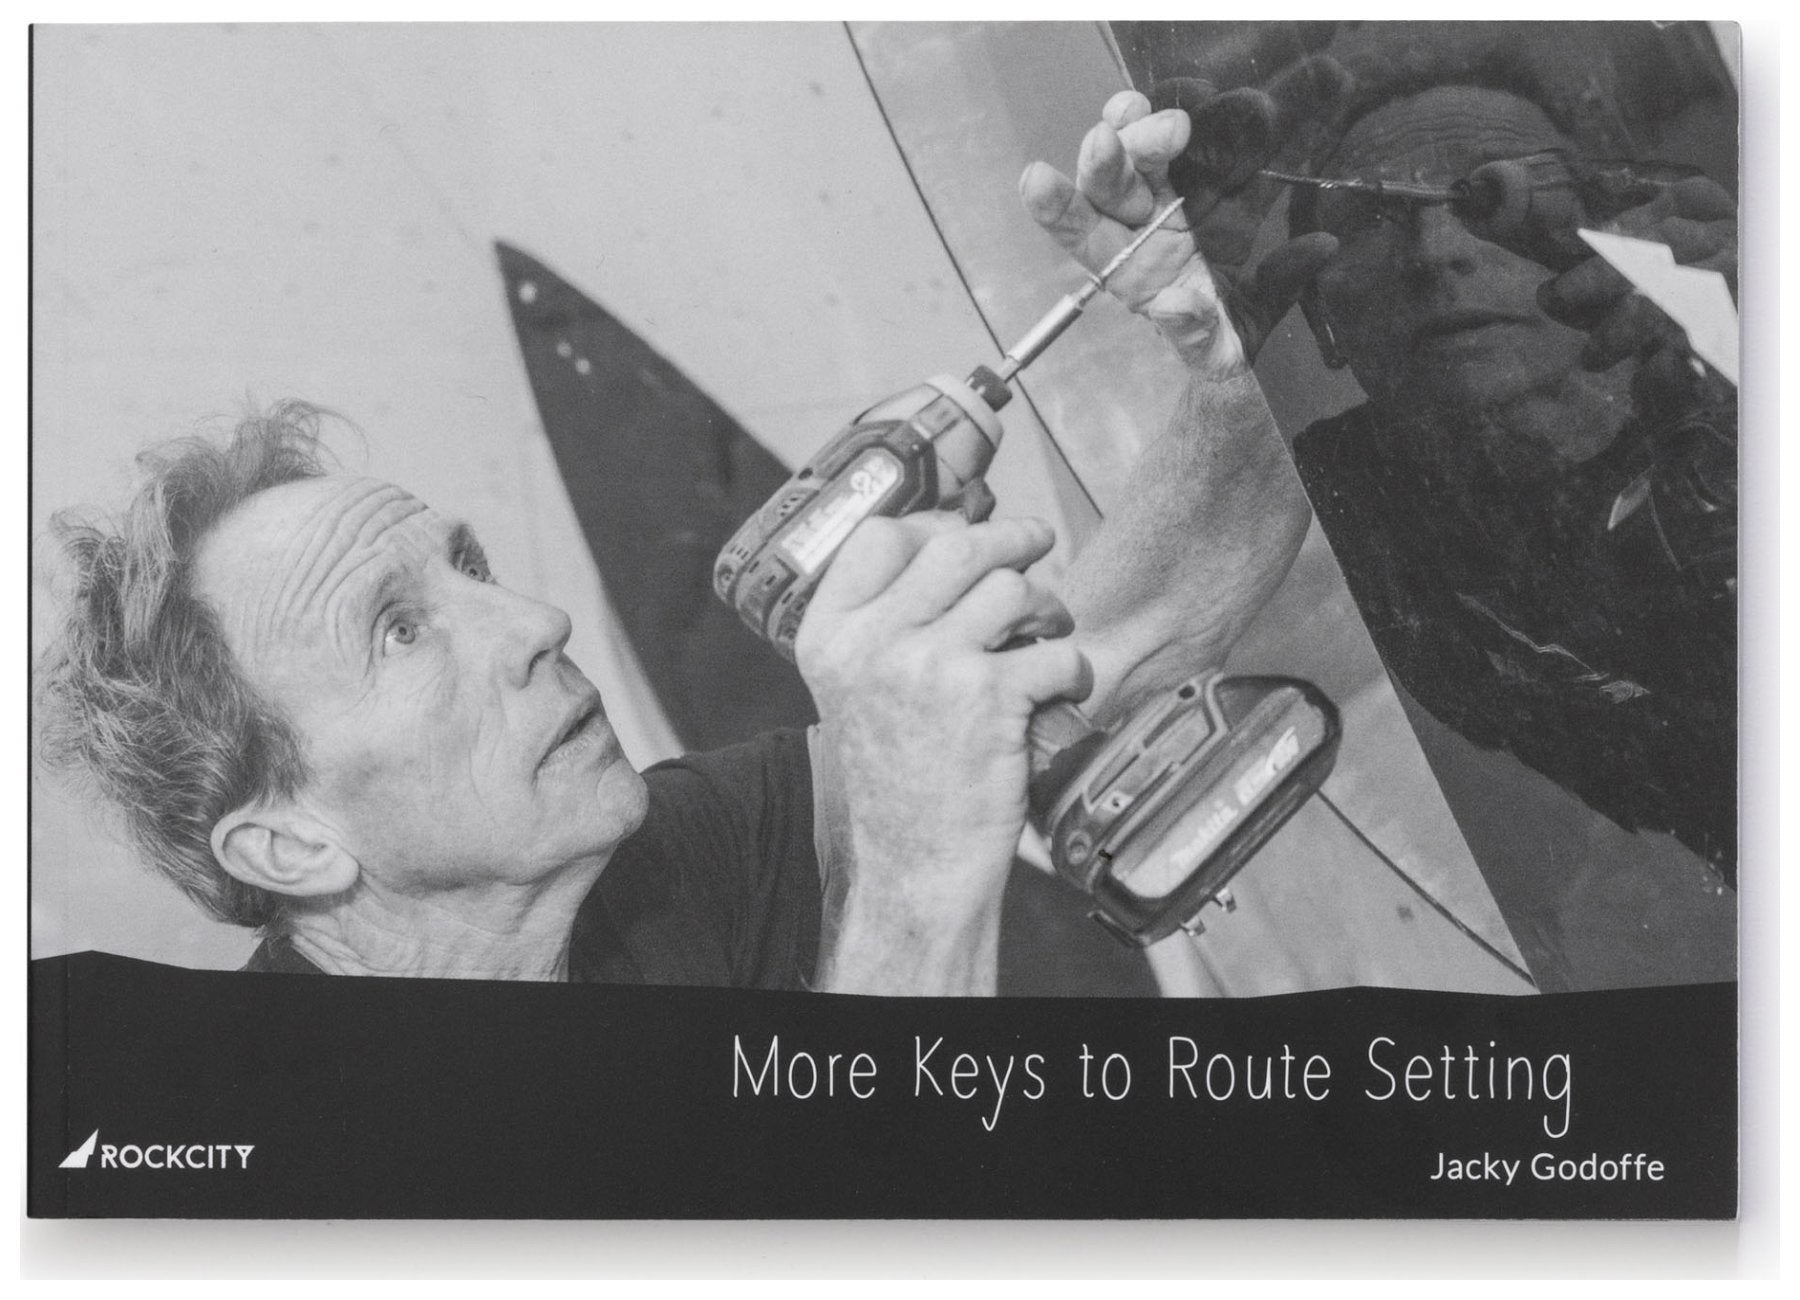 More Keys to Route Setting, routesetting guide